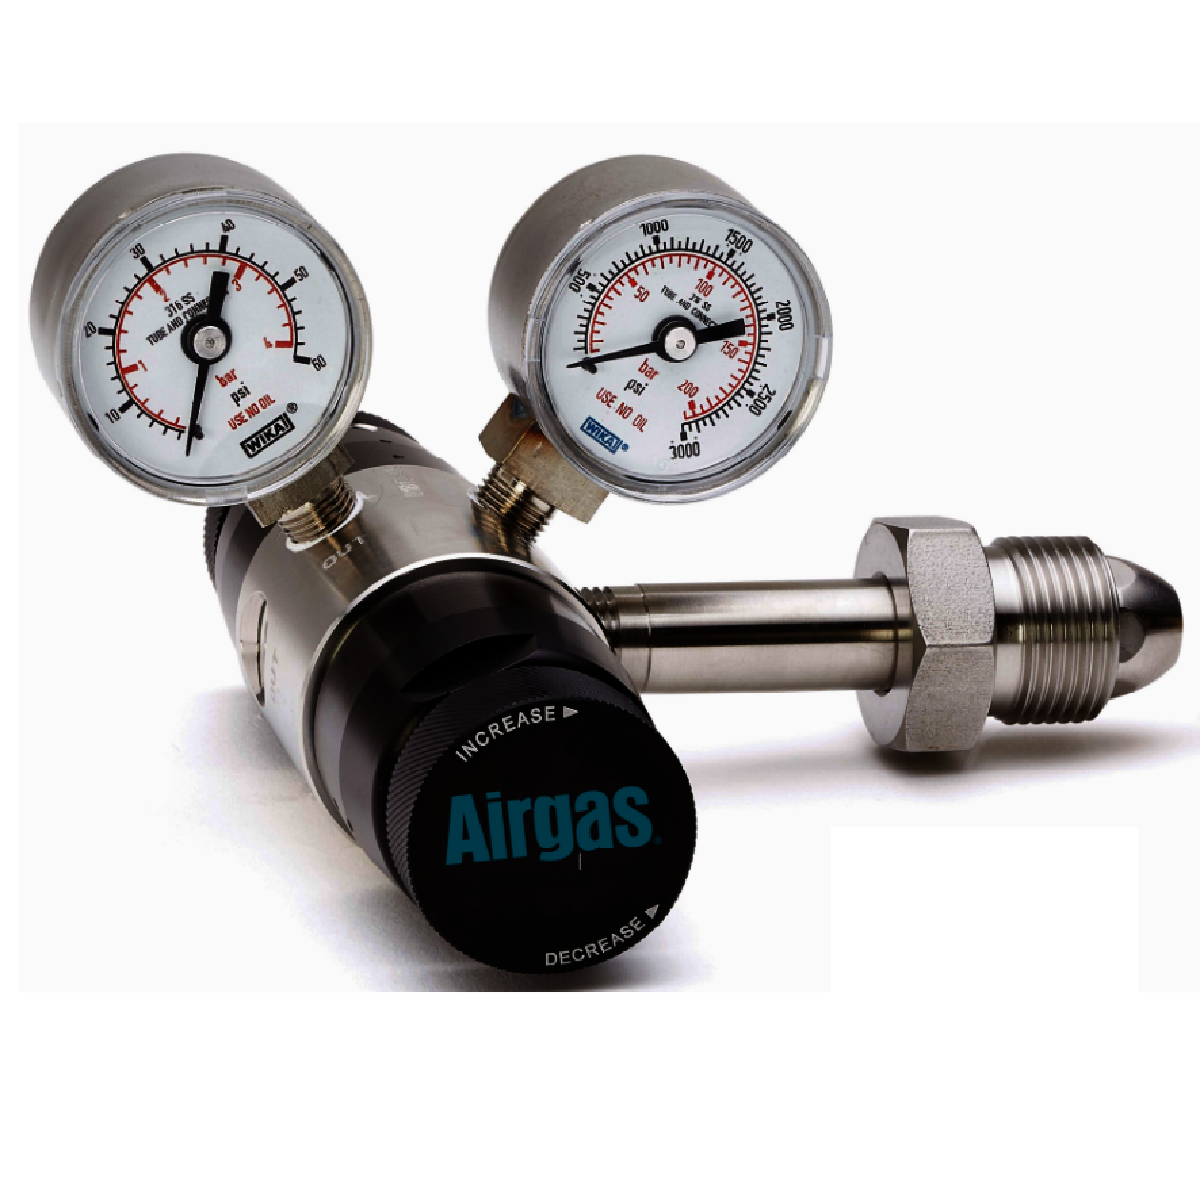 Airgas Model 216CS580 Stainless Steel High Purity Two Stage Regulator With CGA-580 Connection